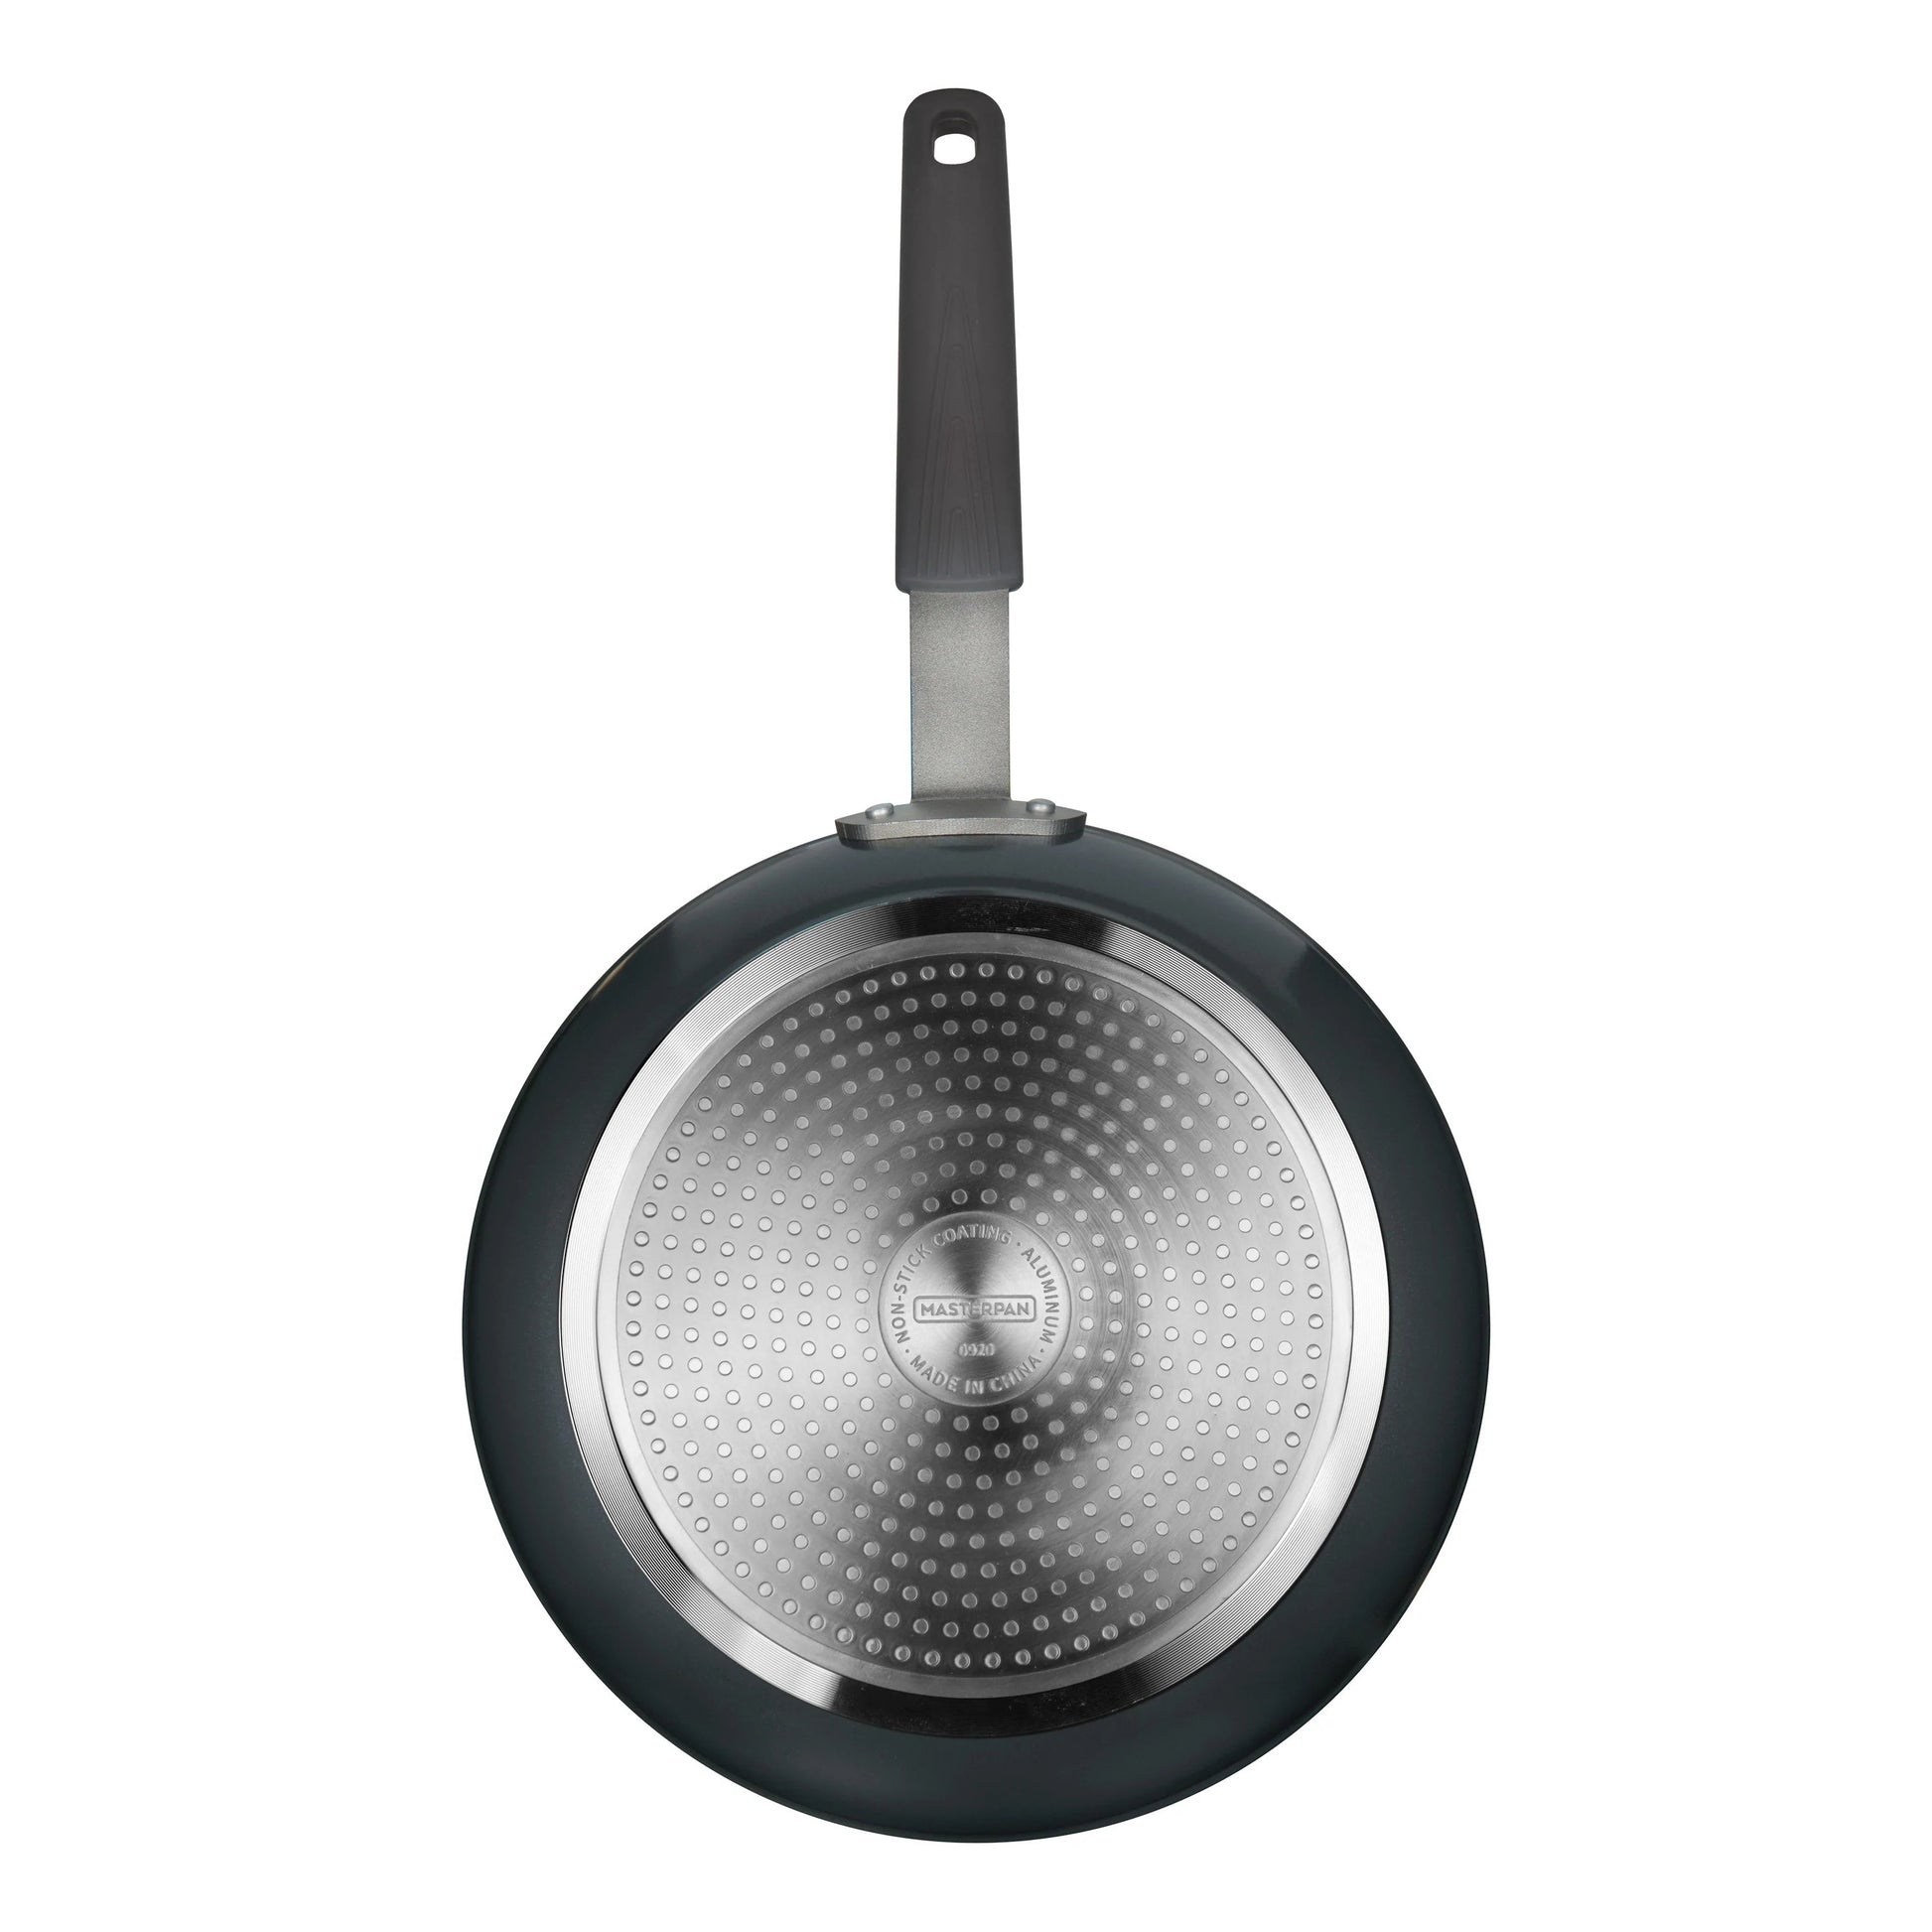 https://kitchenoasis.com/cdn/shop/files/MASTERPAN-Chefs-Series-11-4-Layer-Ceramic-Re-Enforced-Non-Stick-Cast-Aluminum-Frying-Pan-and-Skillet-With-Riveted-Stainless-Steel-Handle-and-Removable-Silicone-Handle-Cover-4.webp?v=1685839954&width=1946